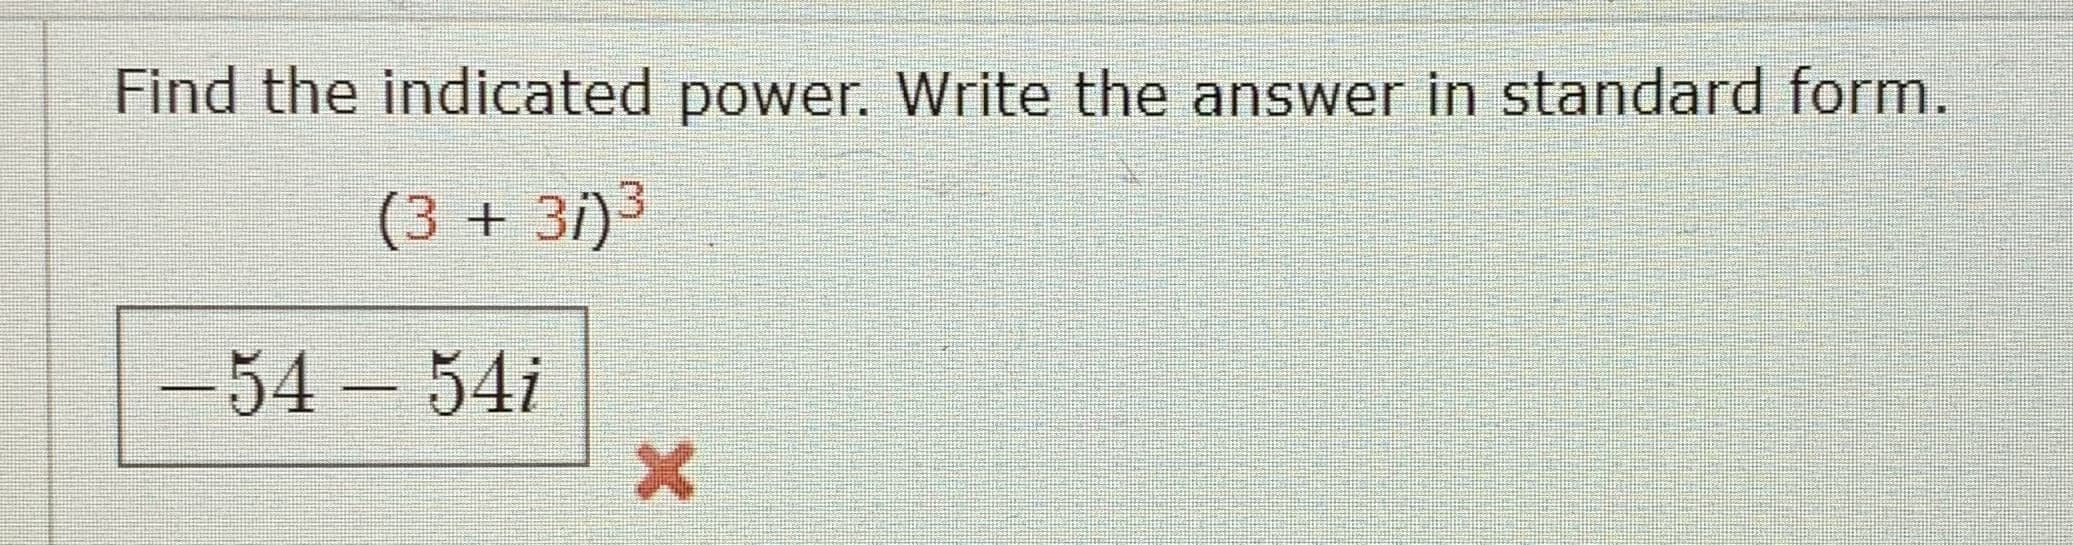 Find the indicated power. Write the answer in standard form.
(3 + 3i)³
